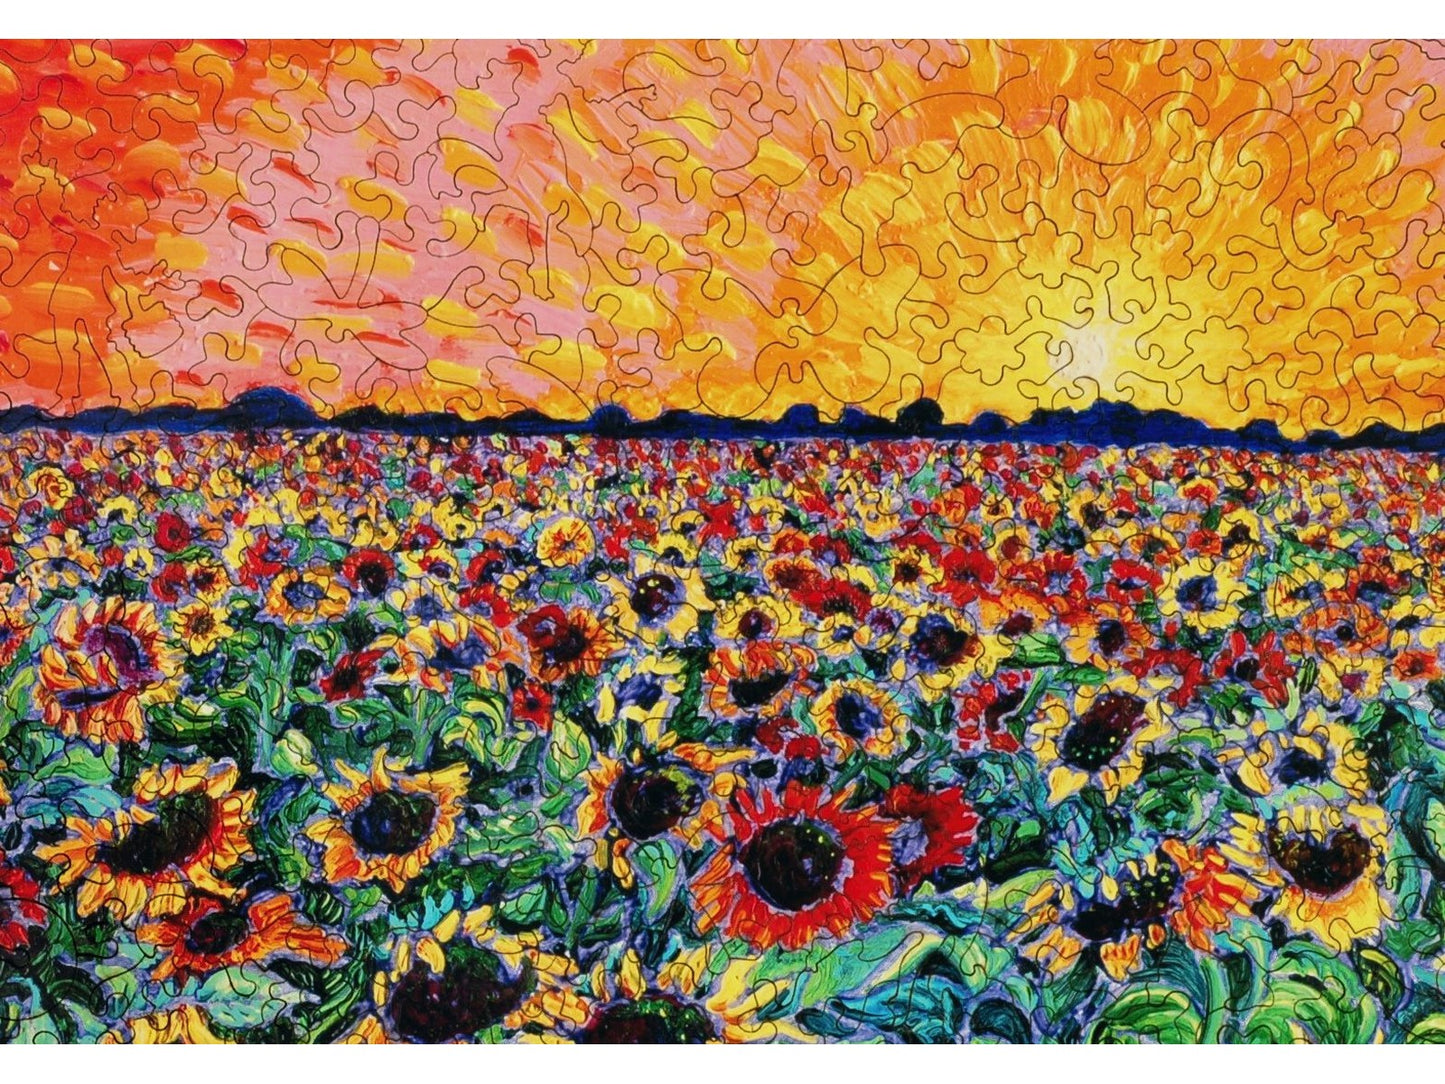 A closeup of the front of the puzzle, Sunflower Splatter Paint, showing the detail in the pieces.